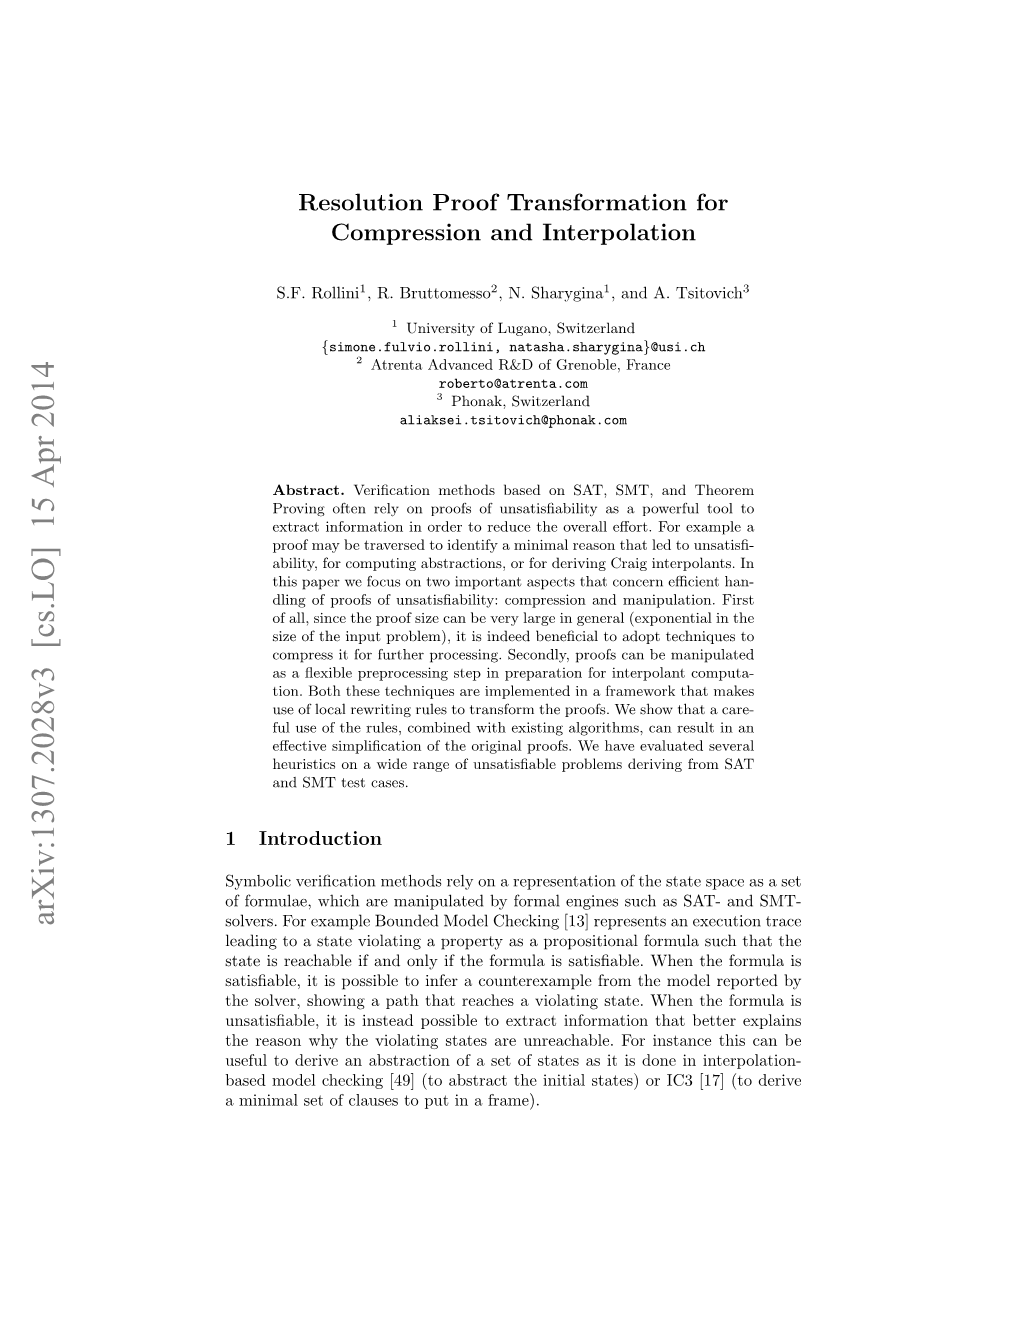 Resolution Proof Transformation for Compression and Interpolation